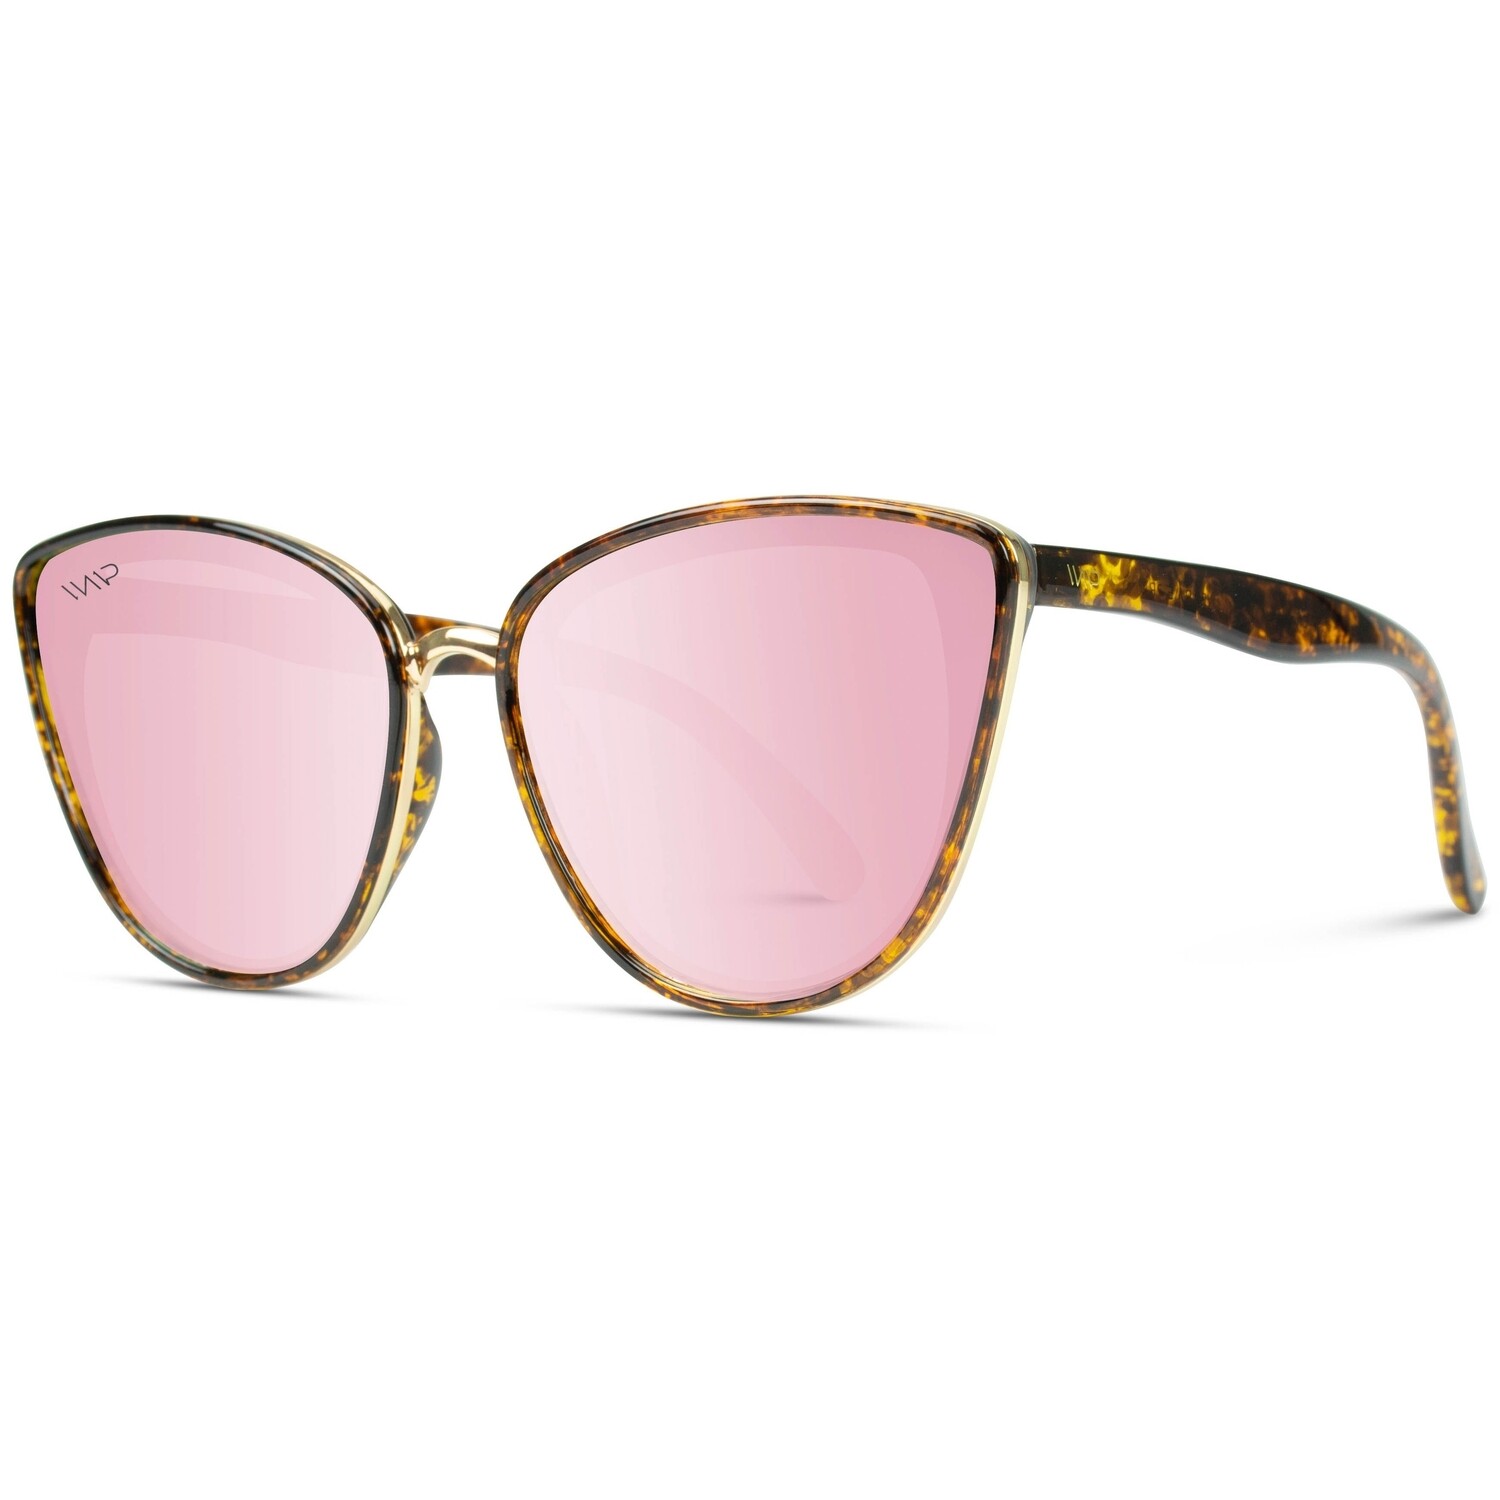 Aria Sunglasses Tortoise Frame with Mirror Pink Lens